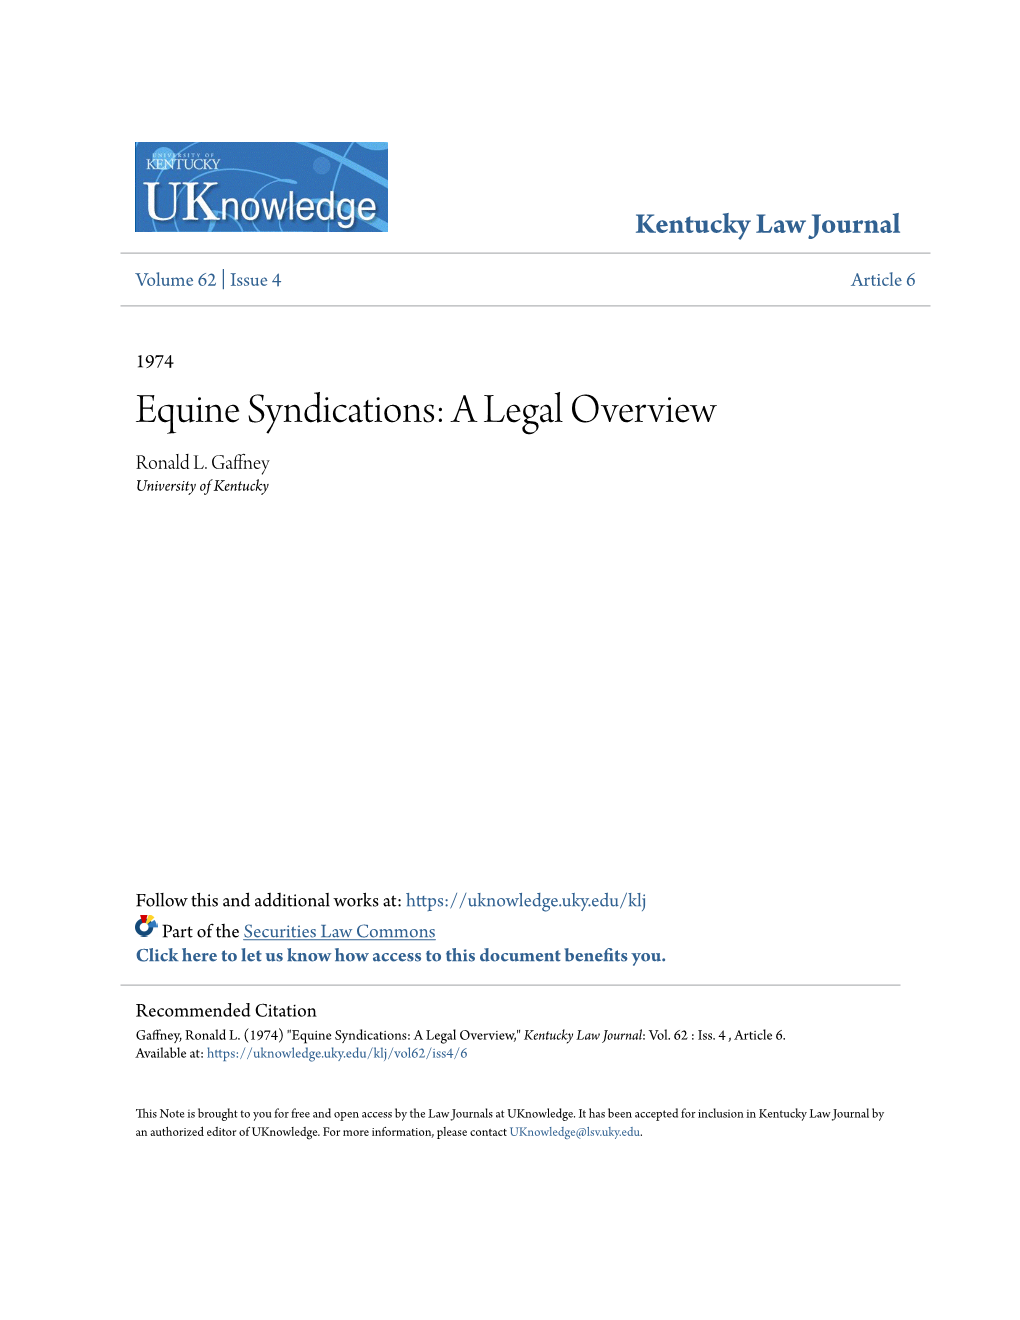 Equine Syndications: a Legal Overview Ronald L